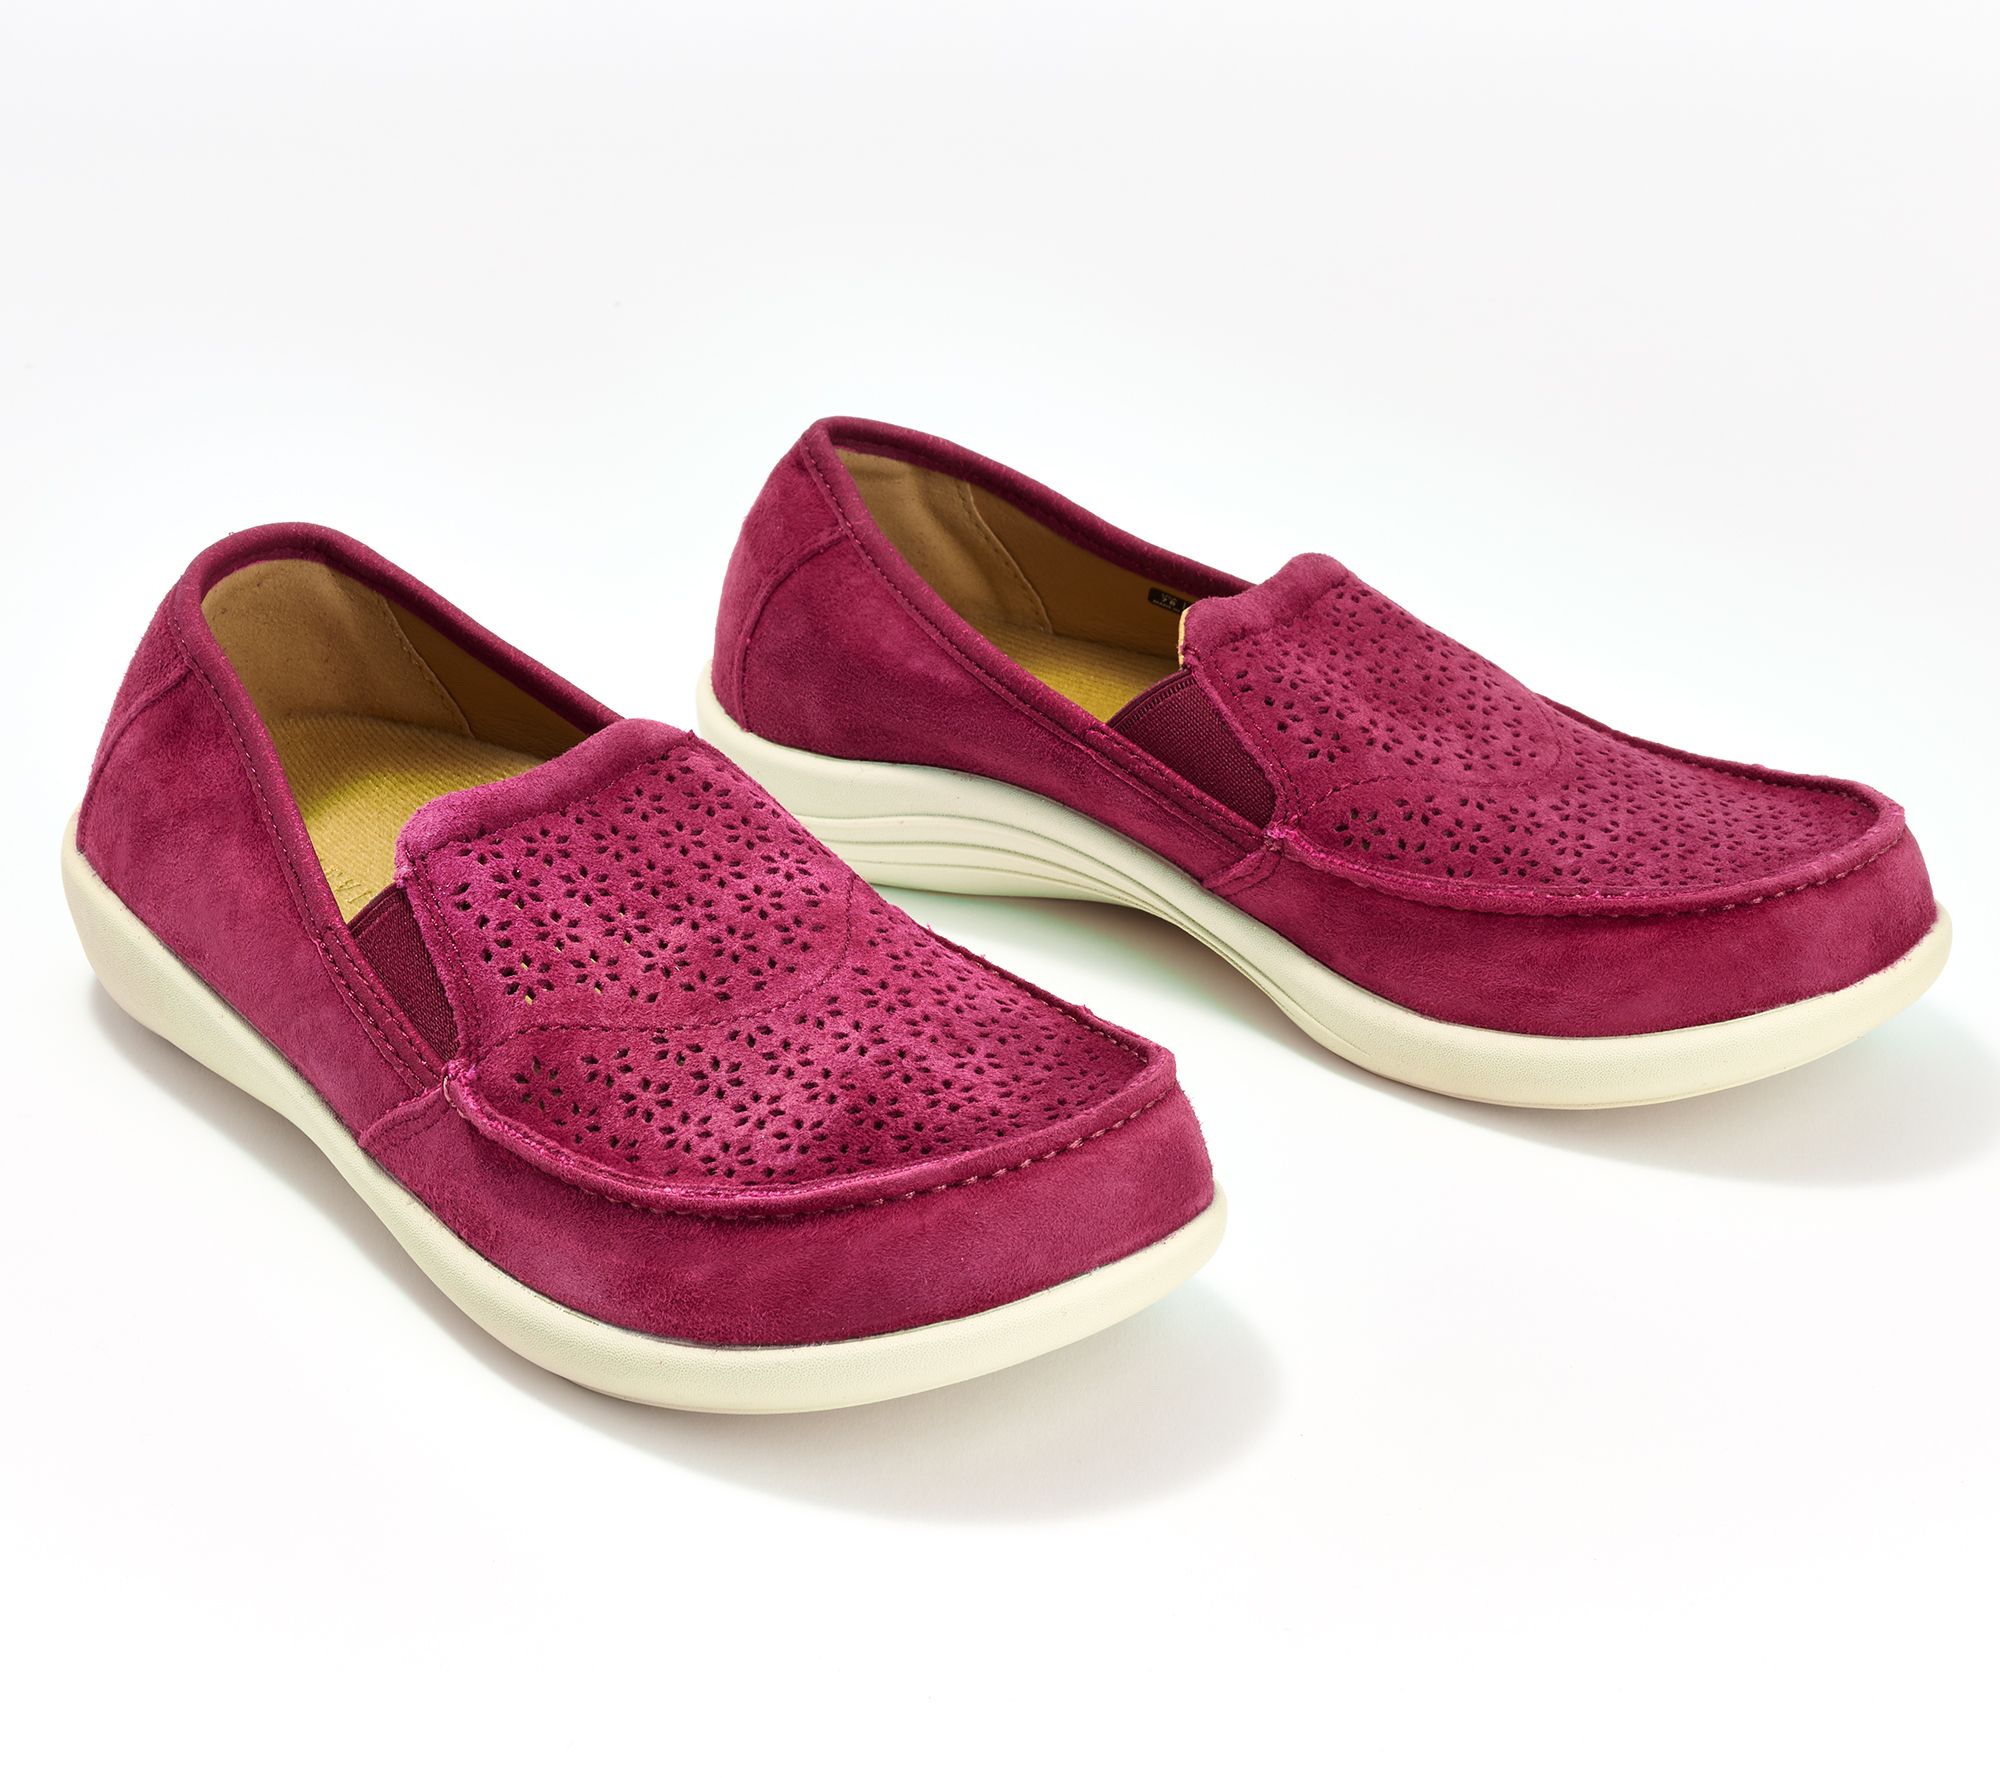 Revitalign Orthotic Perforated Suede Slip-Ons Siesta Sunshine - QVC.com